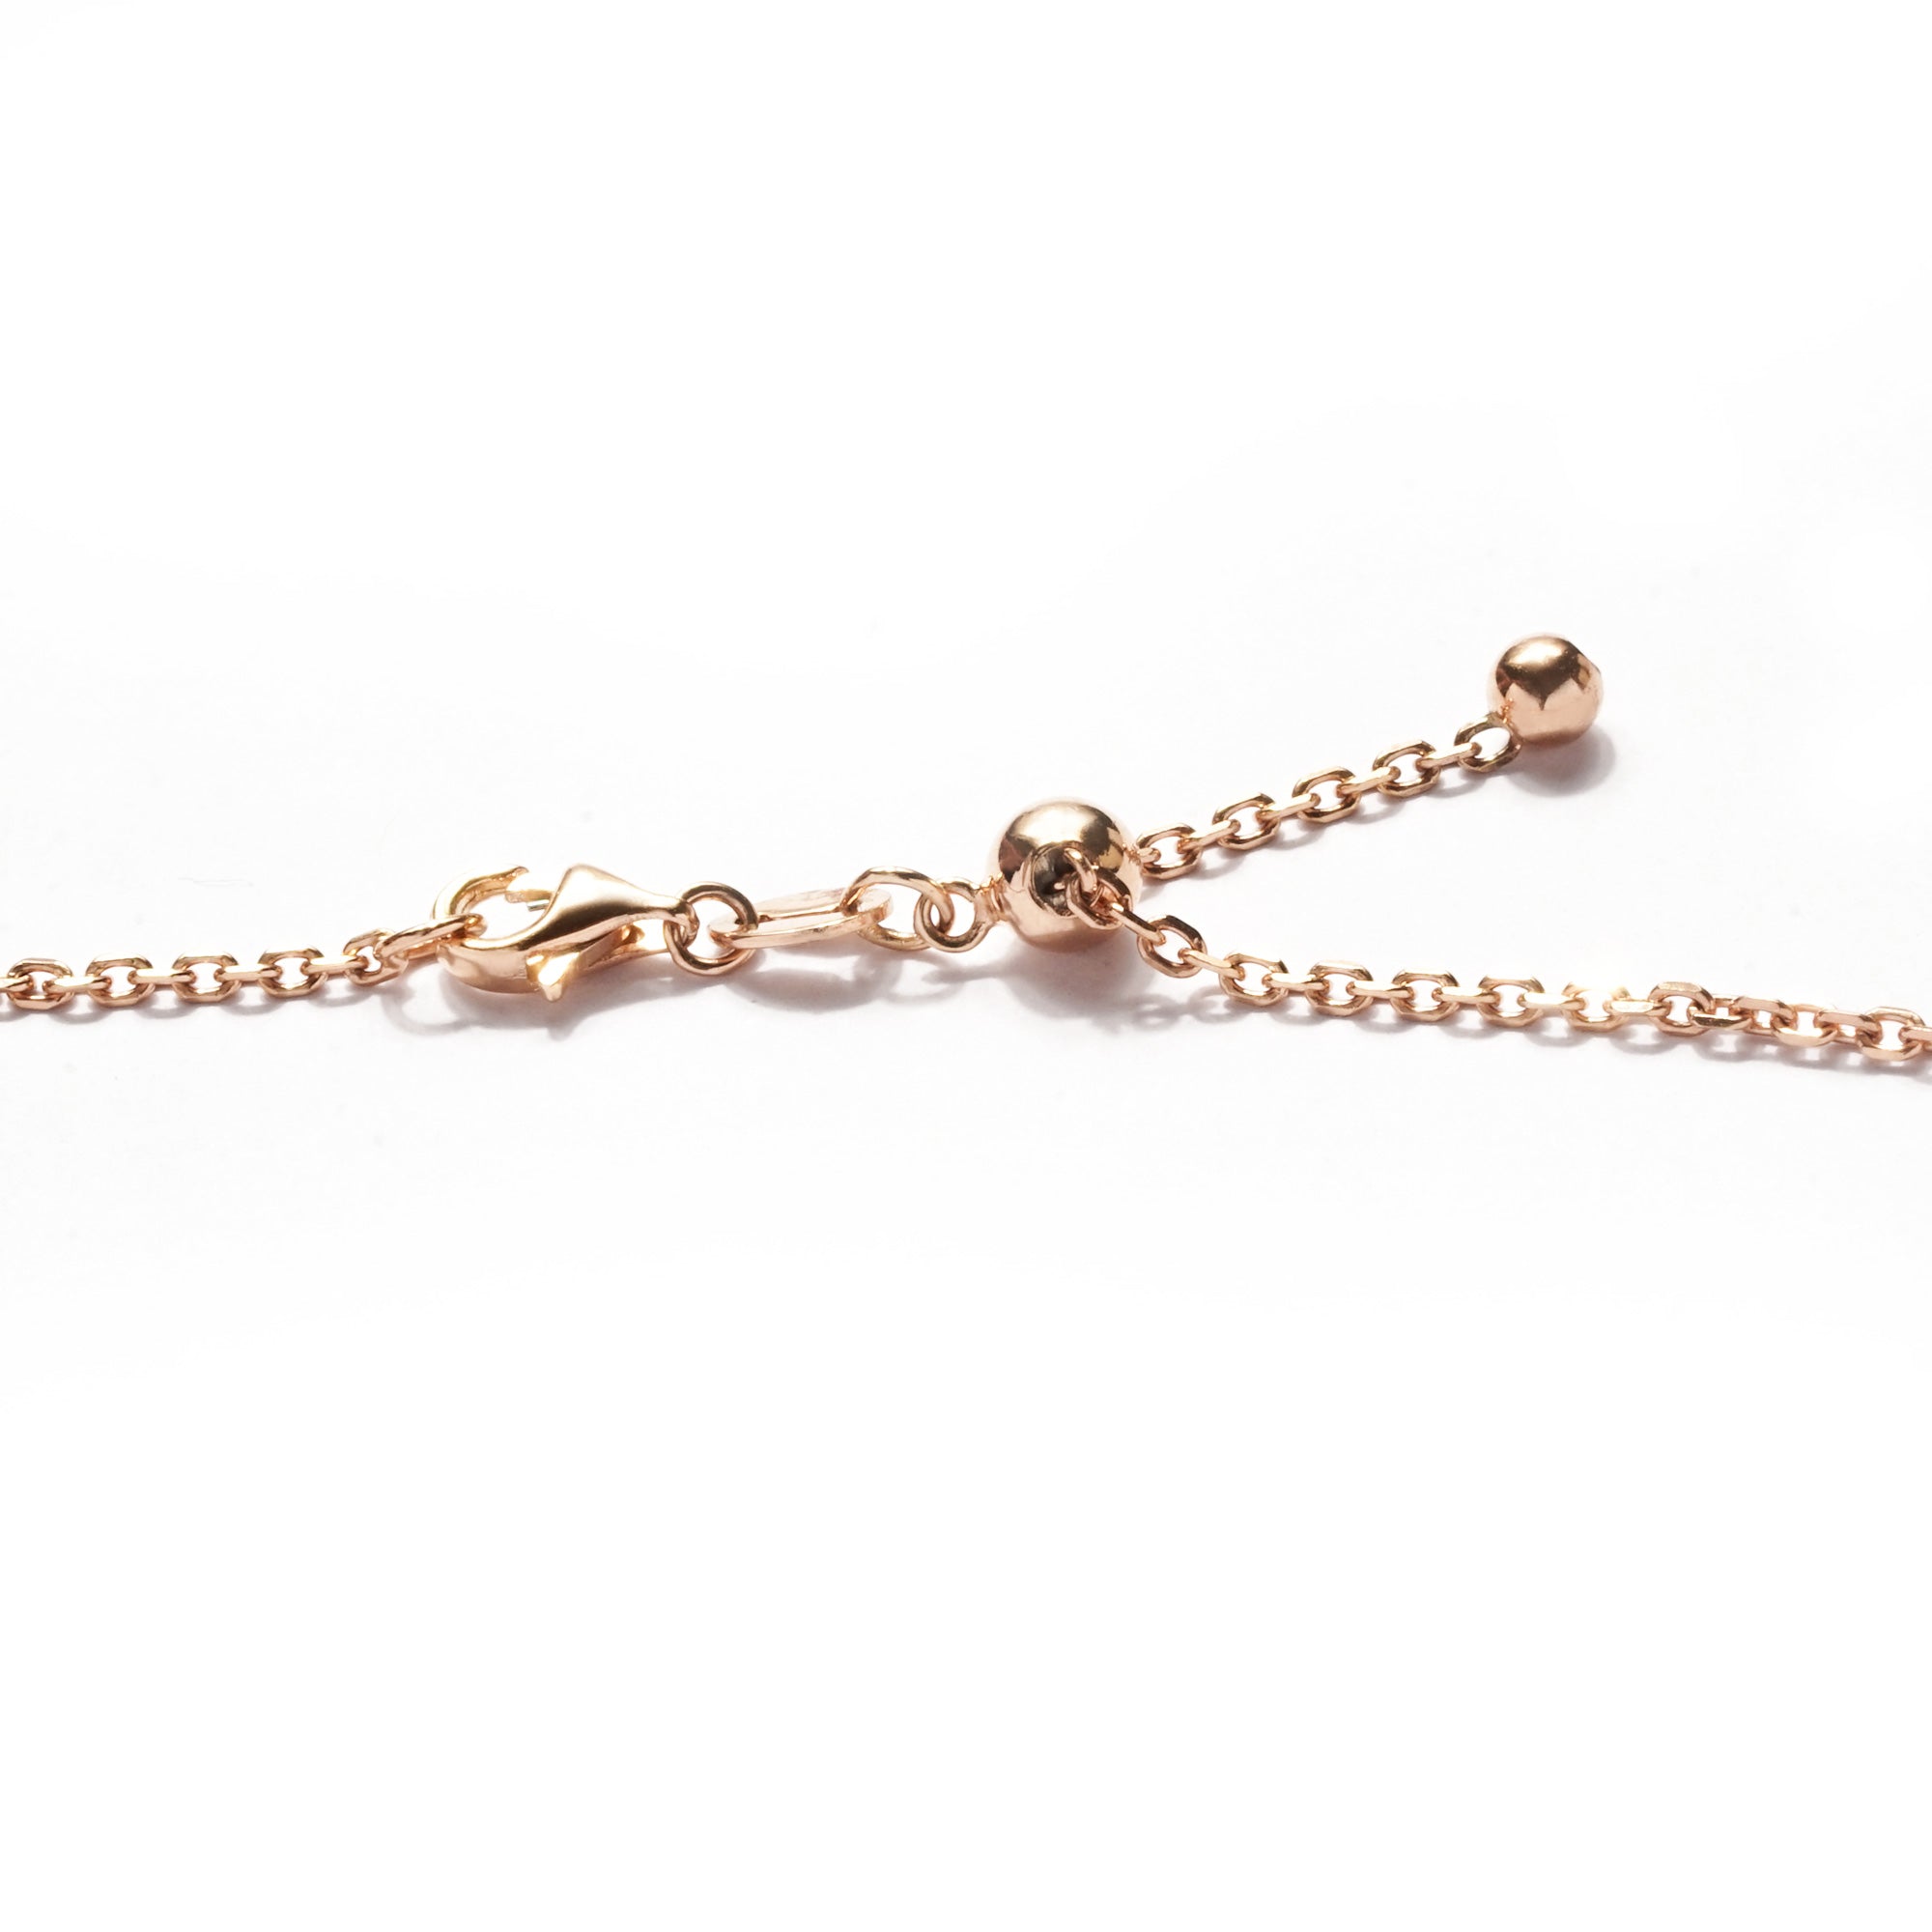 Rosita Gold Necklace - Rosy Pink - Juene Jewelry